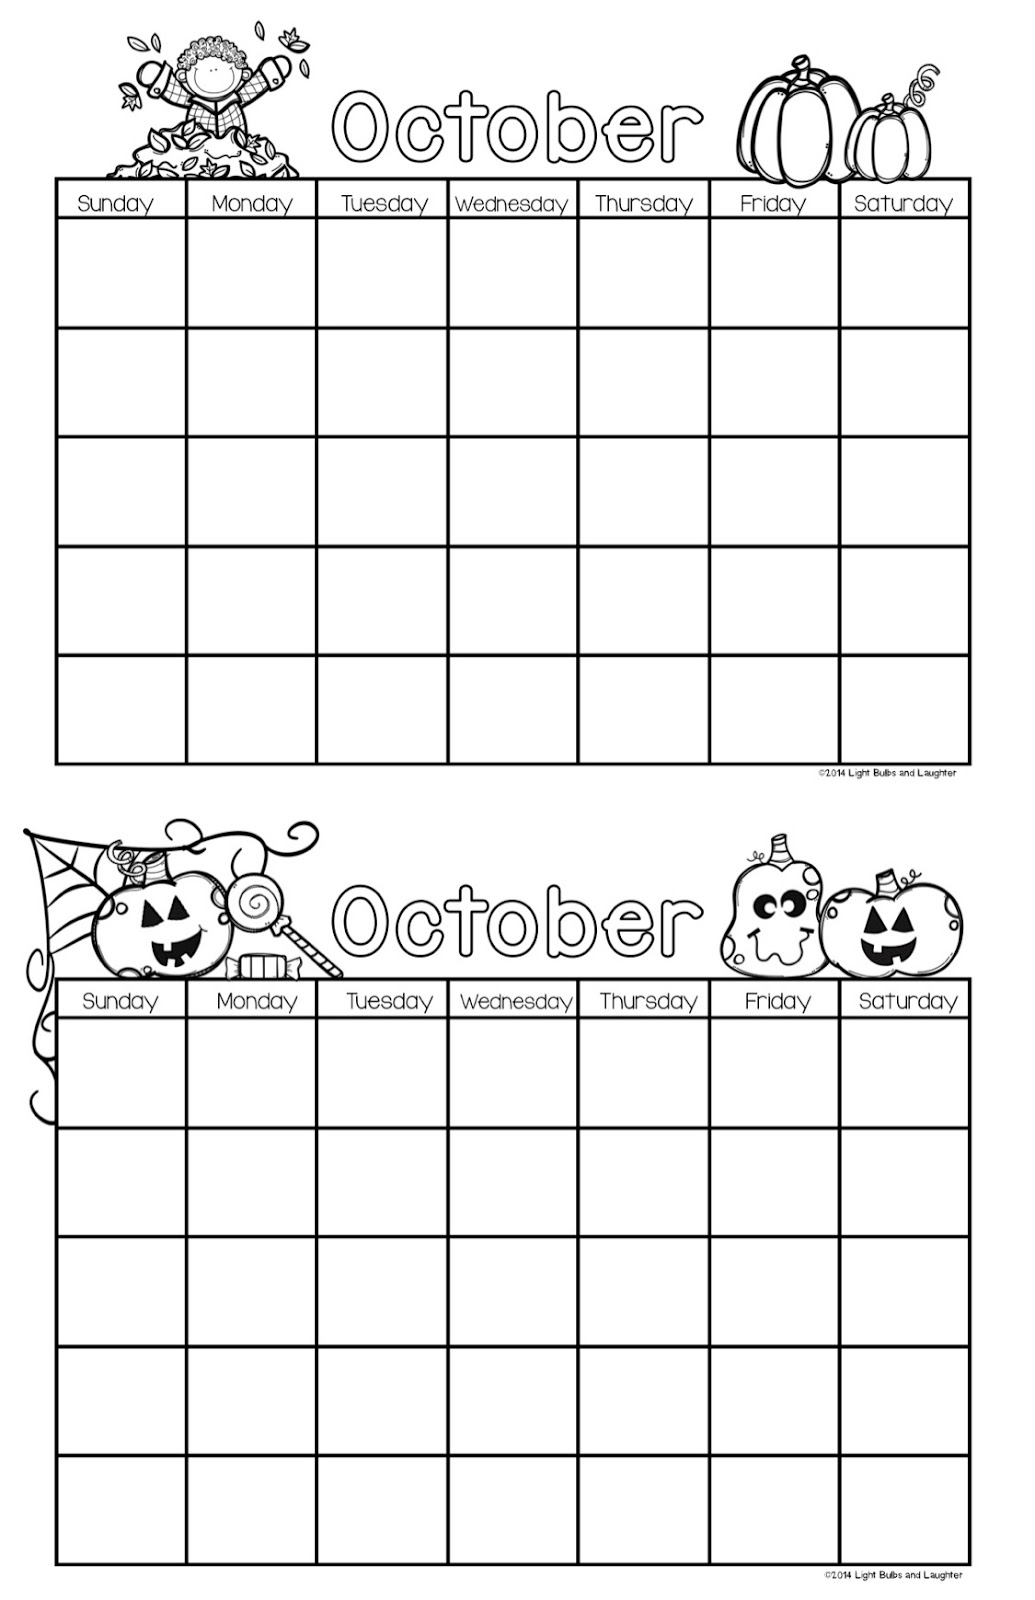 October Calendars FREE from Light Bulbs and Laughter